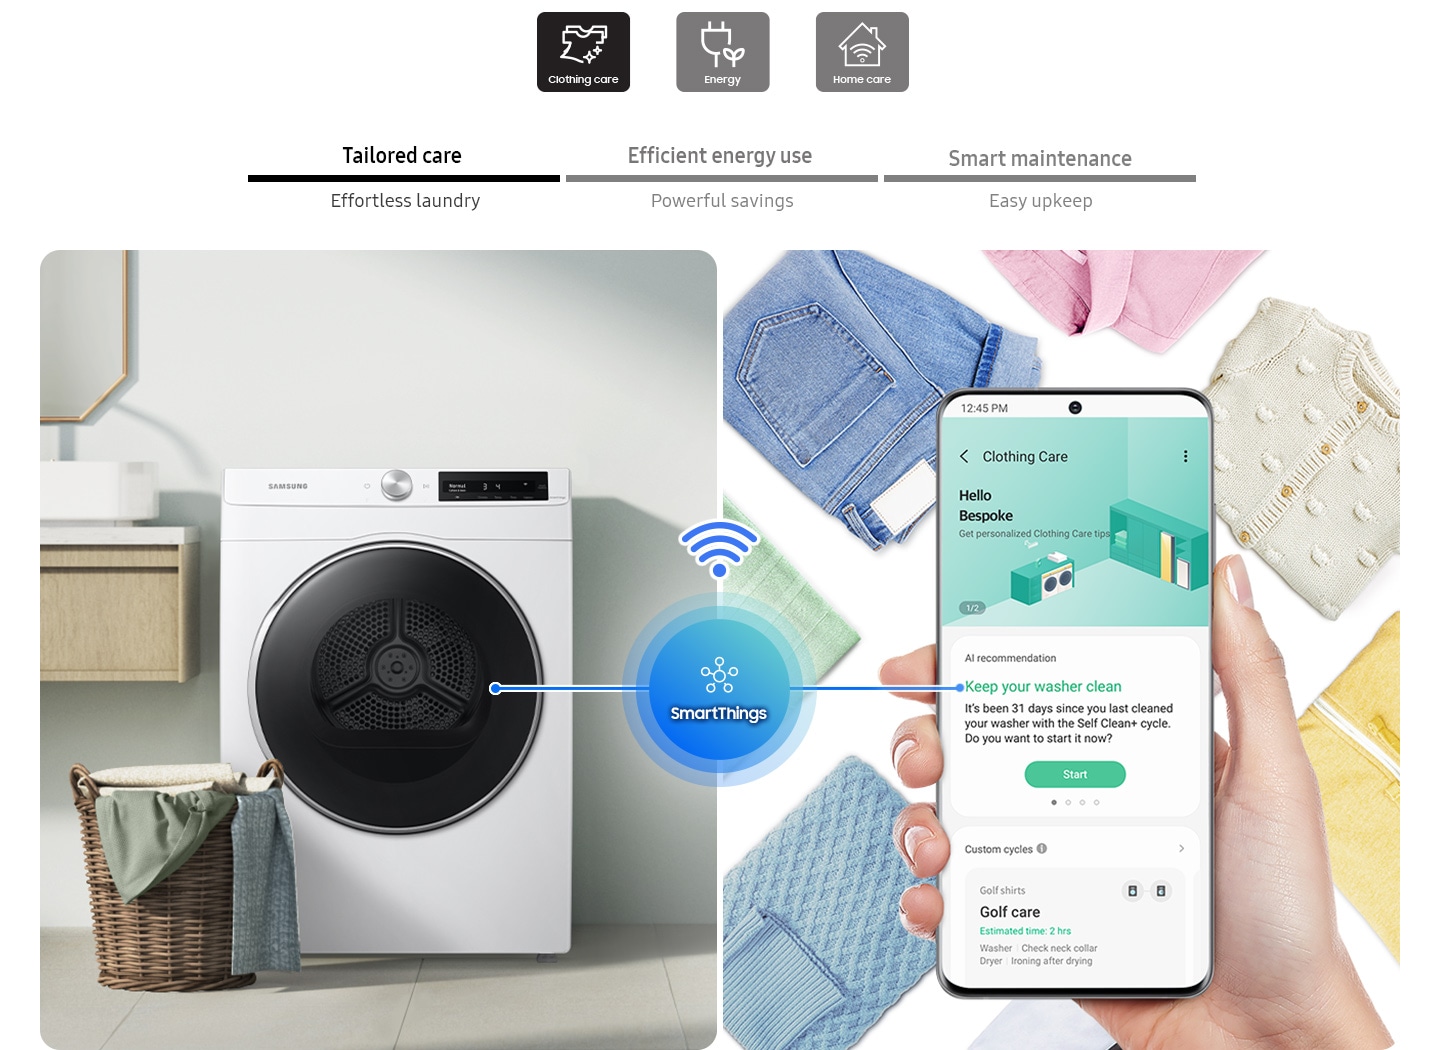 The SmartThings app helps Tailored care, Efficient energy use, Smart maintenance. Clothing Care displays AI recommendations for effortless laundry, Energy notifies estimated cost based on personal monthly usage for powerful saving, Home Care helps easy upkeep the drying machine maintenance.